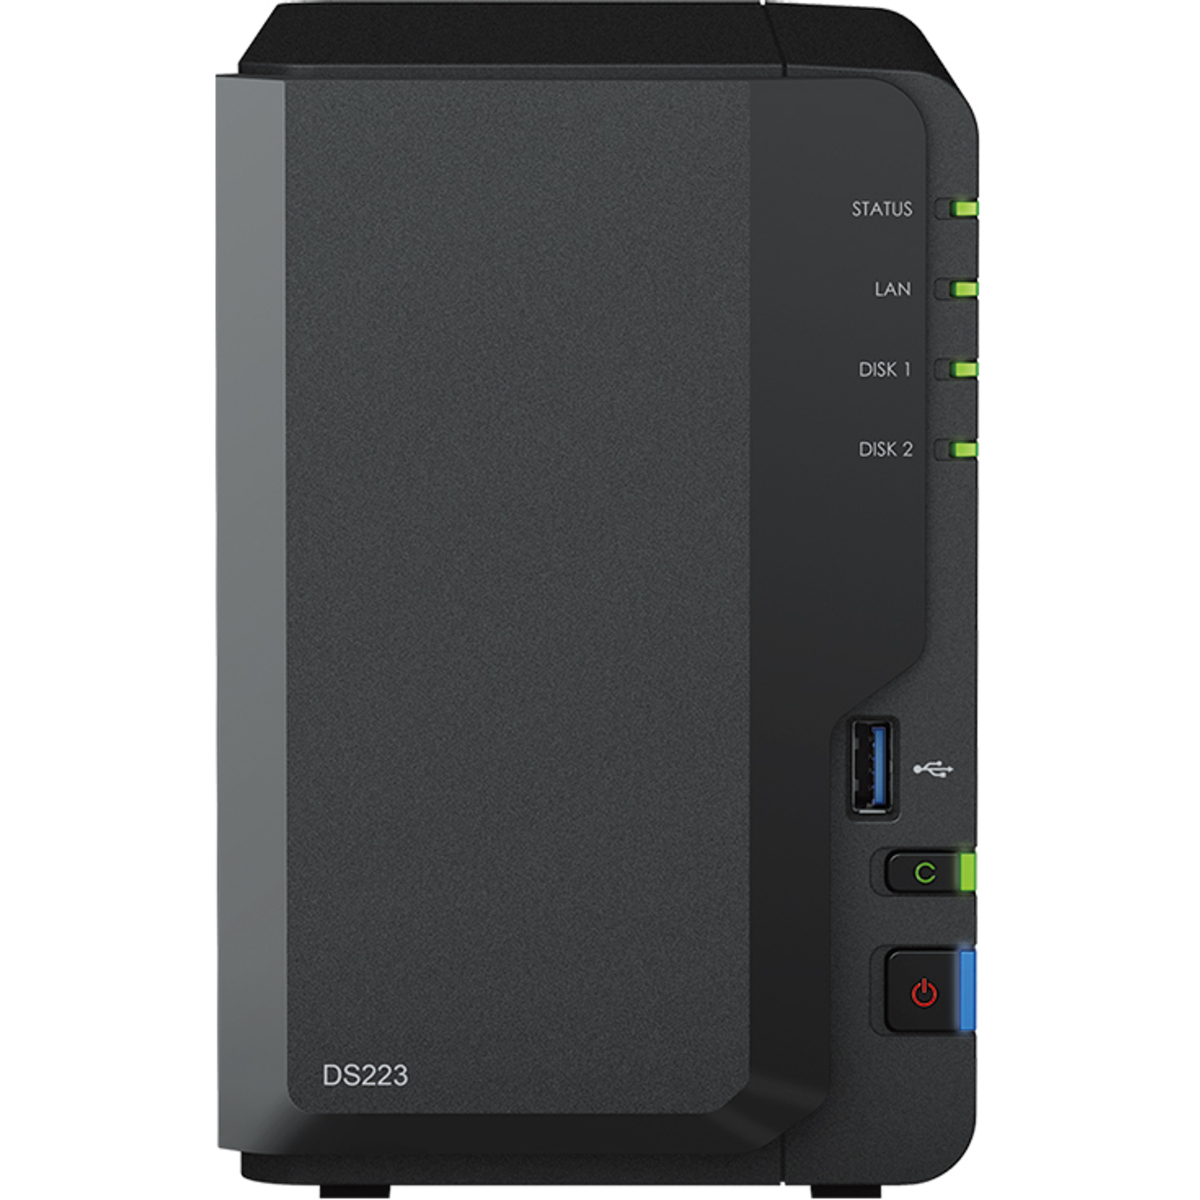 Synology DiskStation DS223 24tb 2-Bay Desktop Personal / Basic Home / Small Office NAS - Network Attached Storage Device 2x12tb Western Digital Gold WD121KRYZ 3.5 7200rpm SATA 6Gb/s HDD ENTERPRISE Class Drives Installed - Burn-In Tested DiskStation DS223